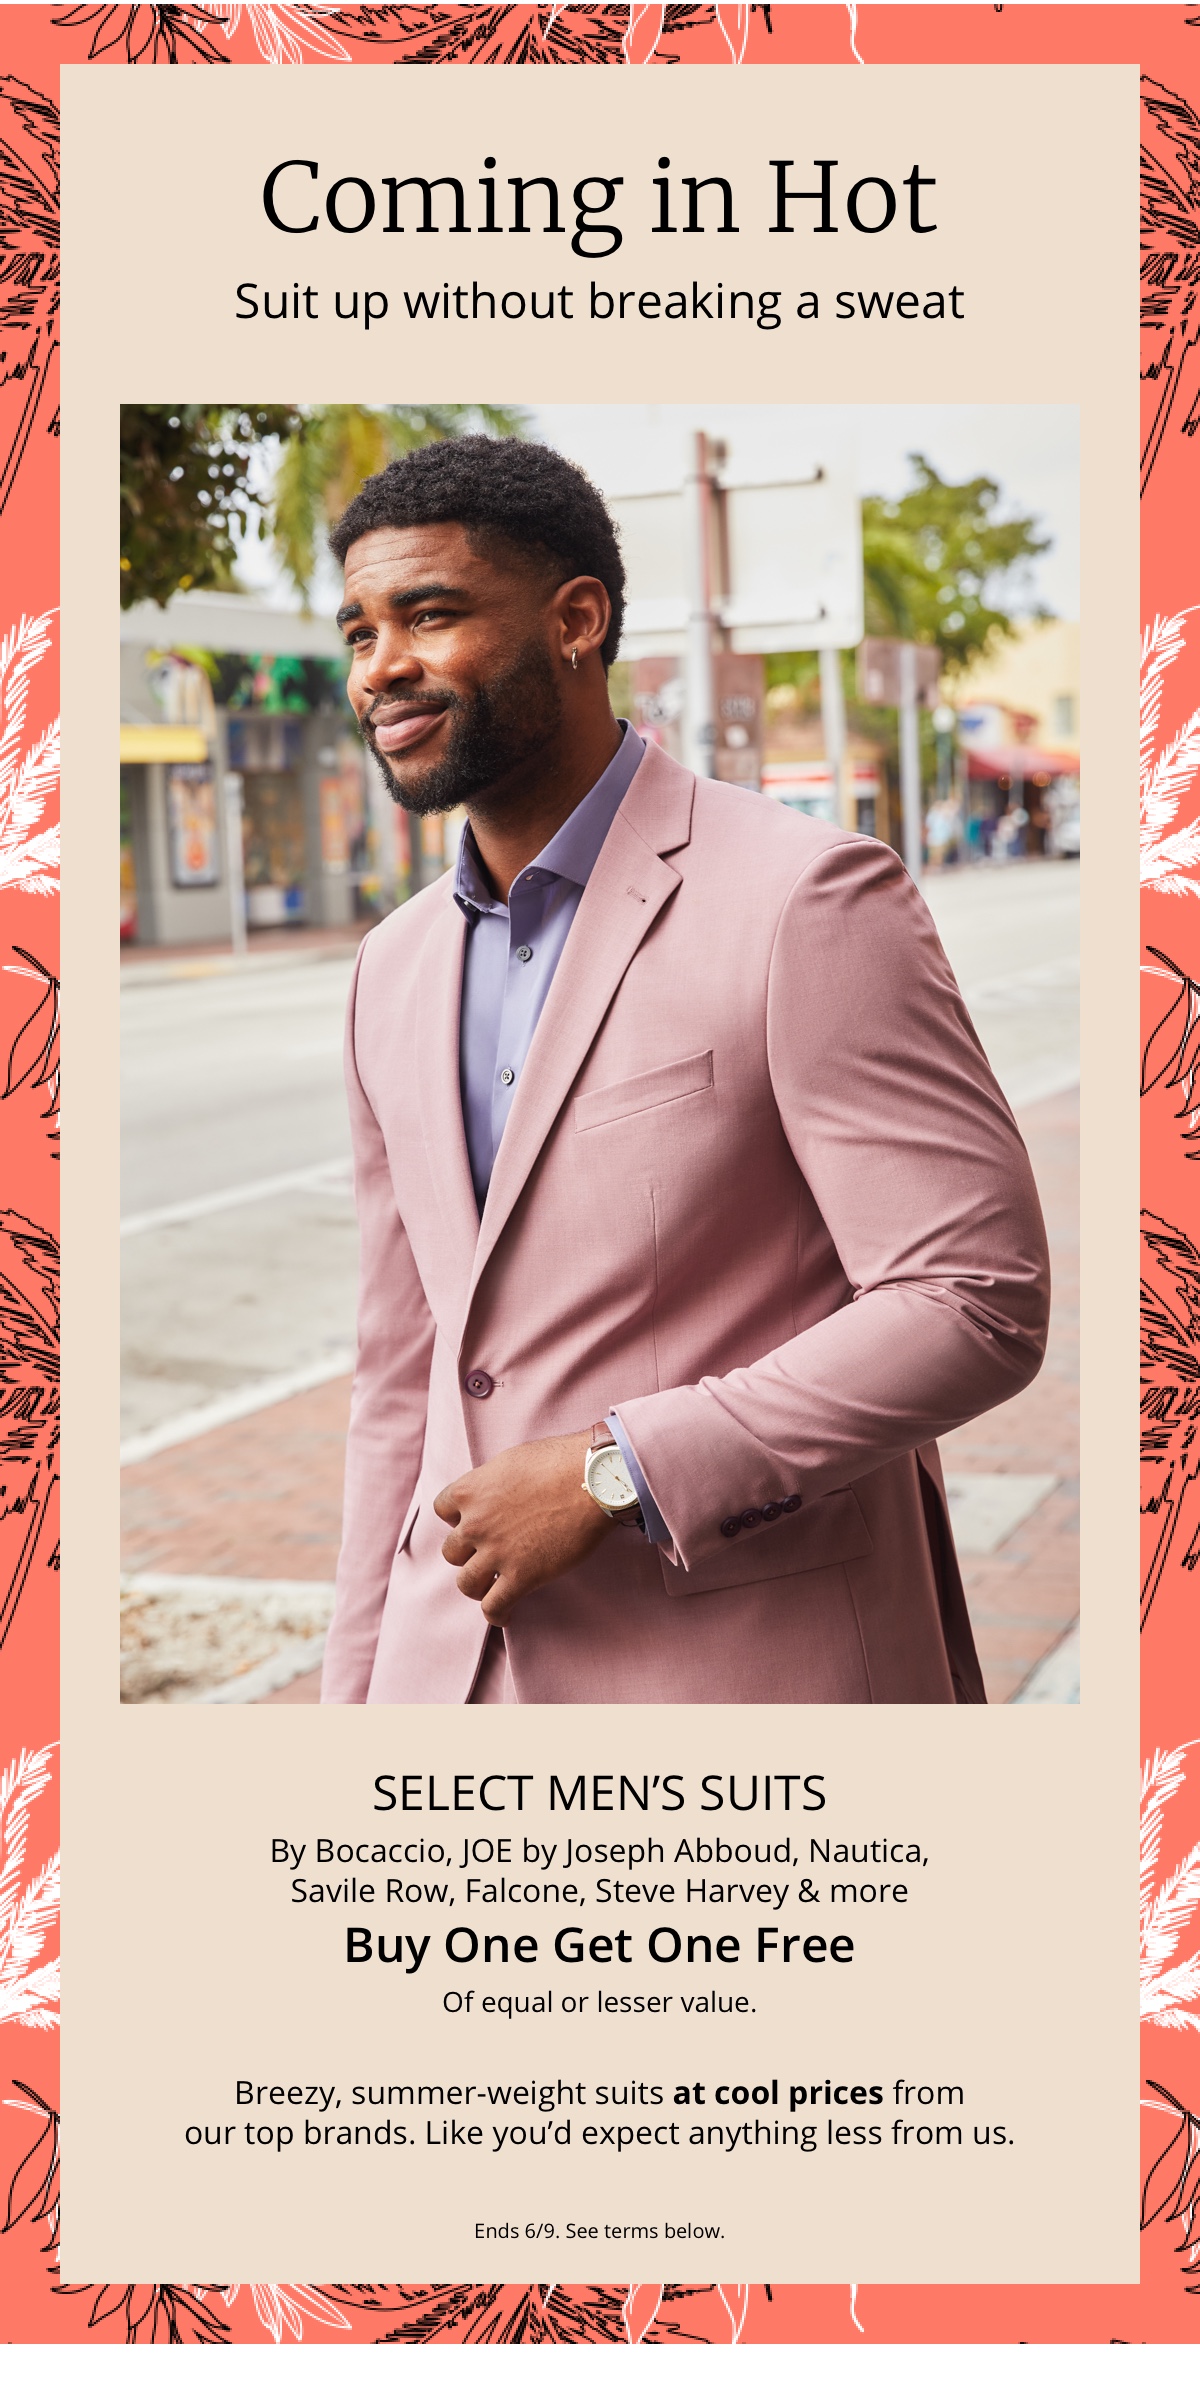 Coming in Hot|Suit up without breaking a sweat|Select Mens Suits| By Bocaccio, JOE by Joseph Abboud, Nautica, |Savile Row, Falcone, Steve Harvey and more| Buy One Get One Free|Of equal or lesser value.|Breezy, summer-weight suits at cool prices from|our top brands. Like youd expect anything less from us.|Ends 6/9. See terms below.